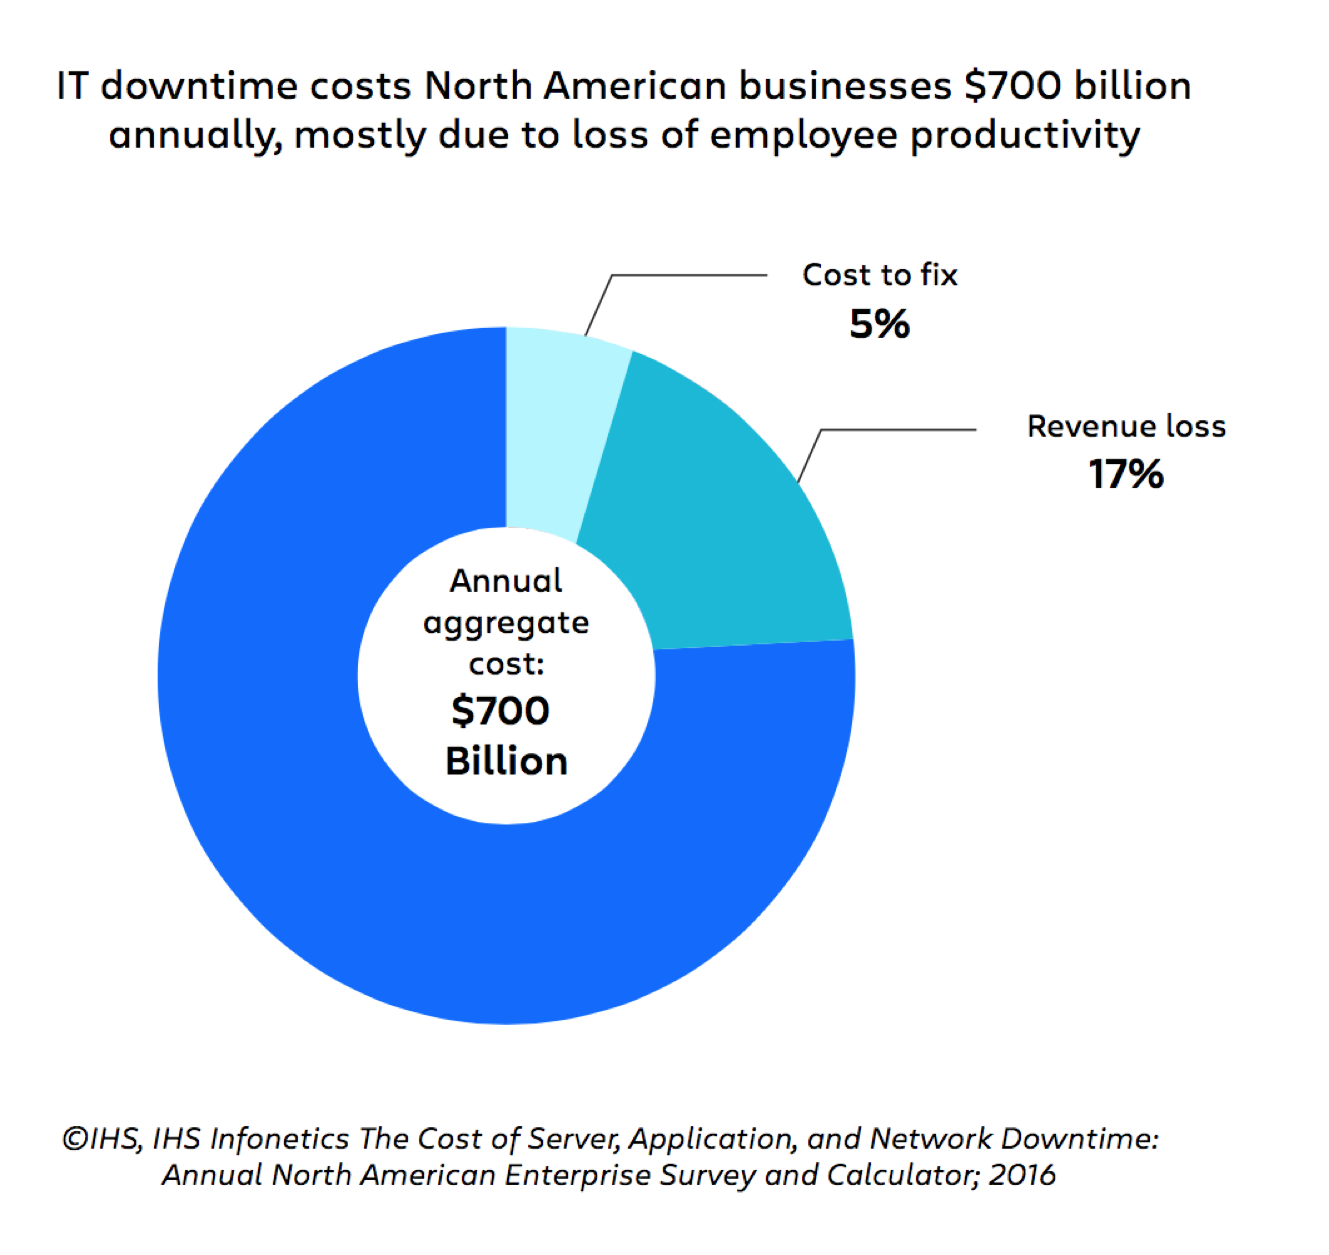 Graphic from page 9 showing IT downtime. Highlights that employee productivity is the largest cost by far. IT downtime costs North American businesses $700 billion annually, mostly due to loss of employee productivity.